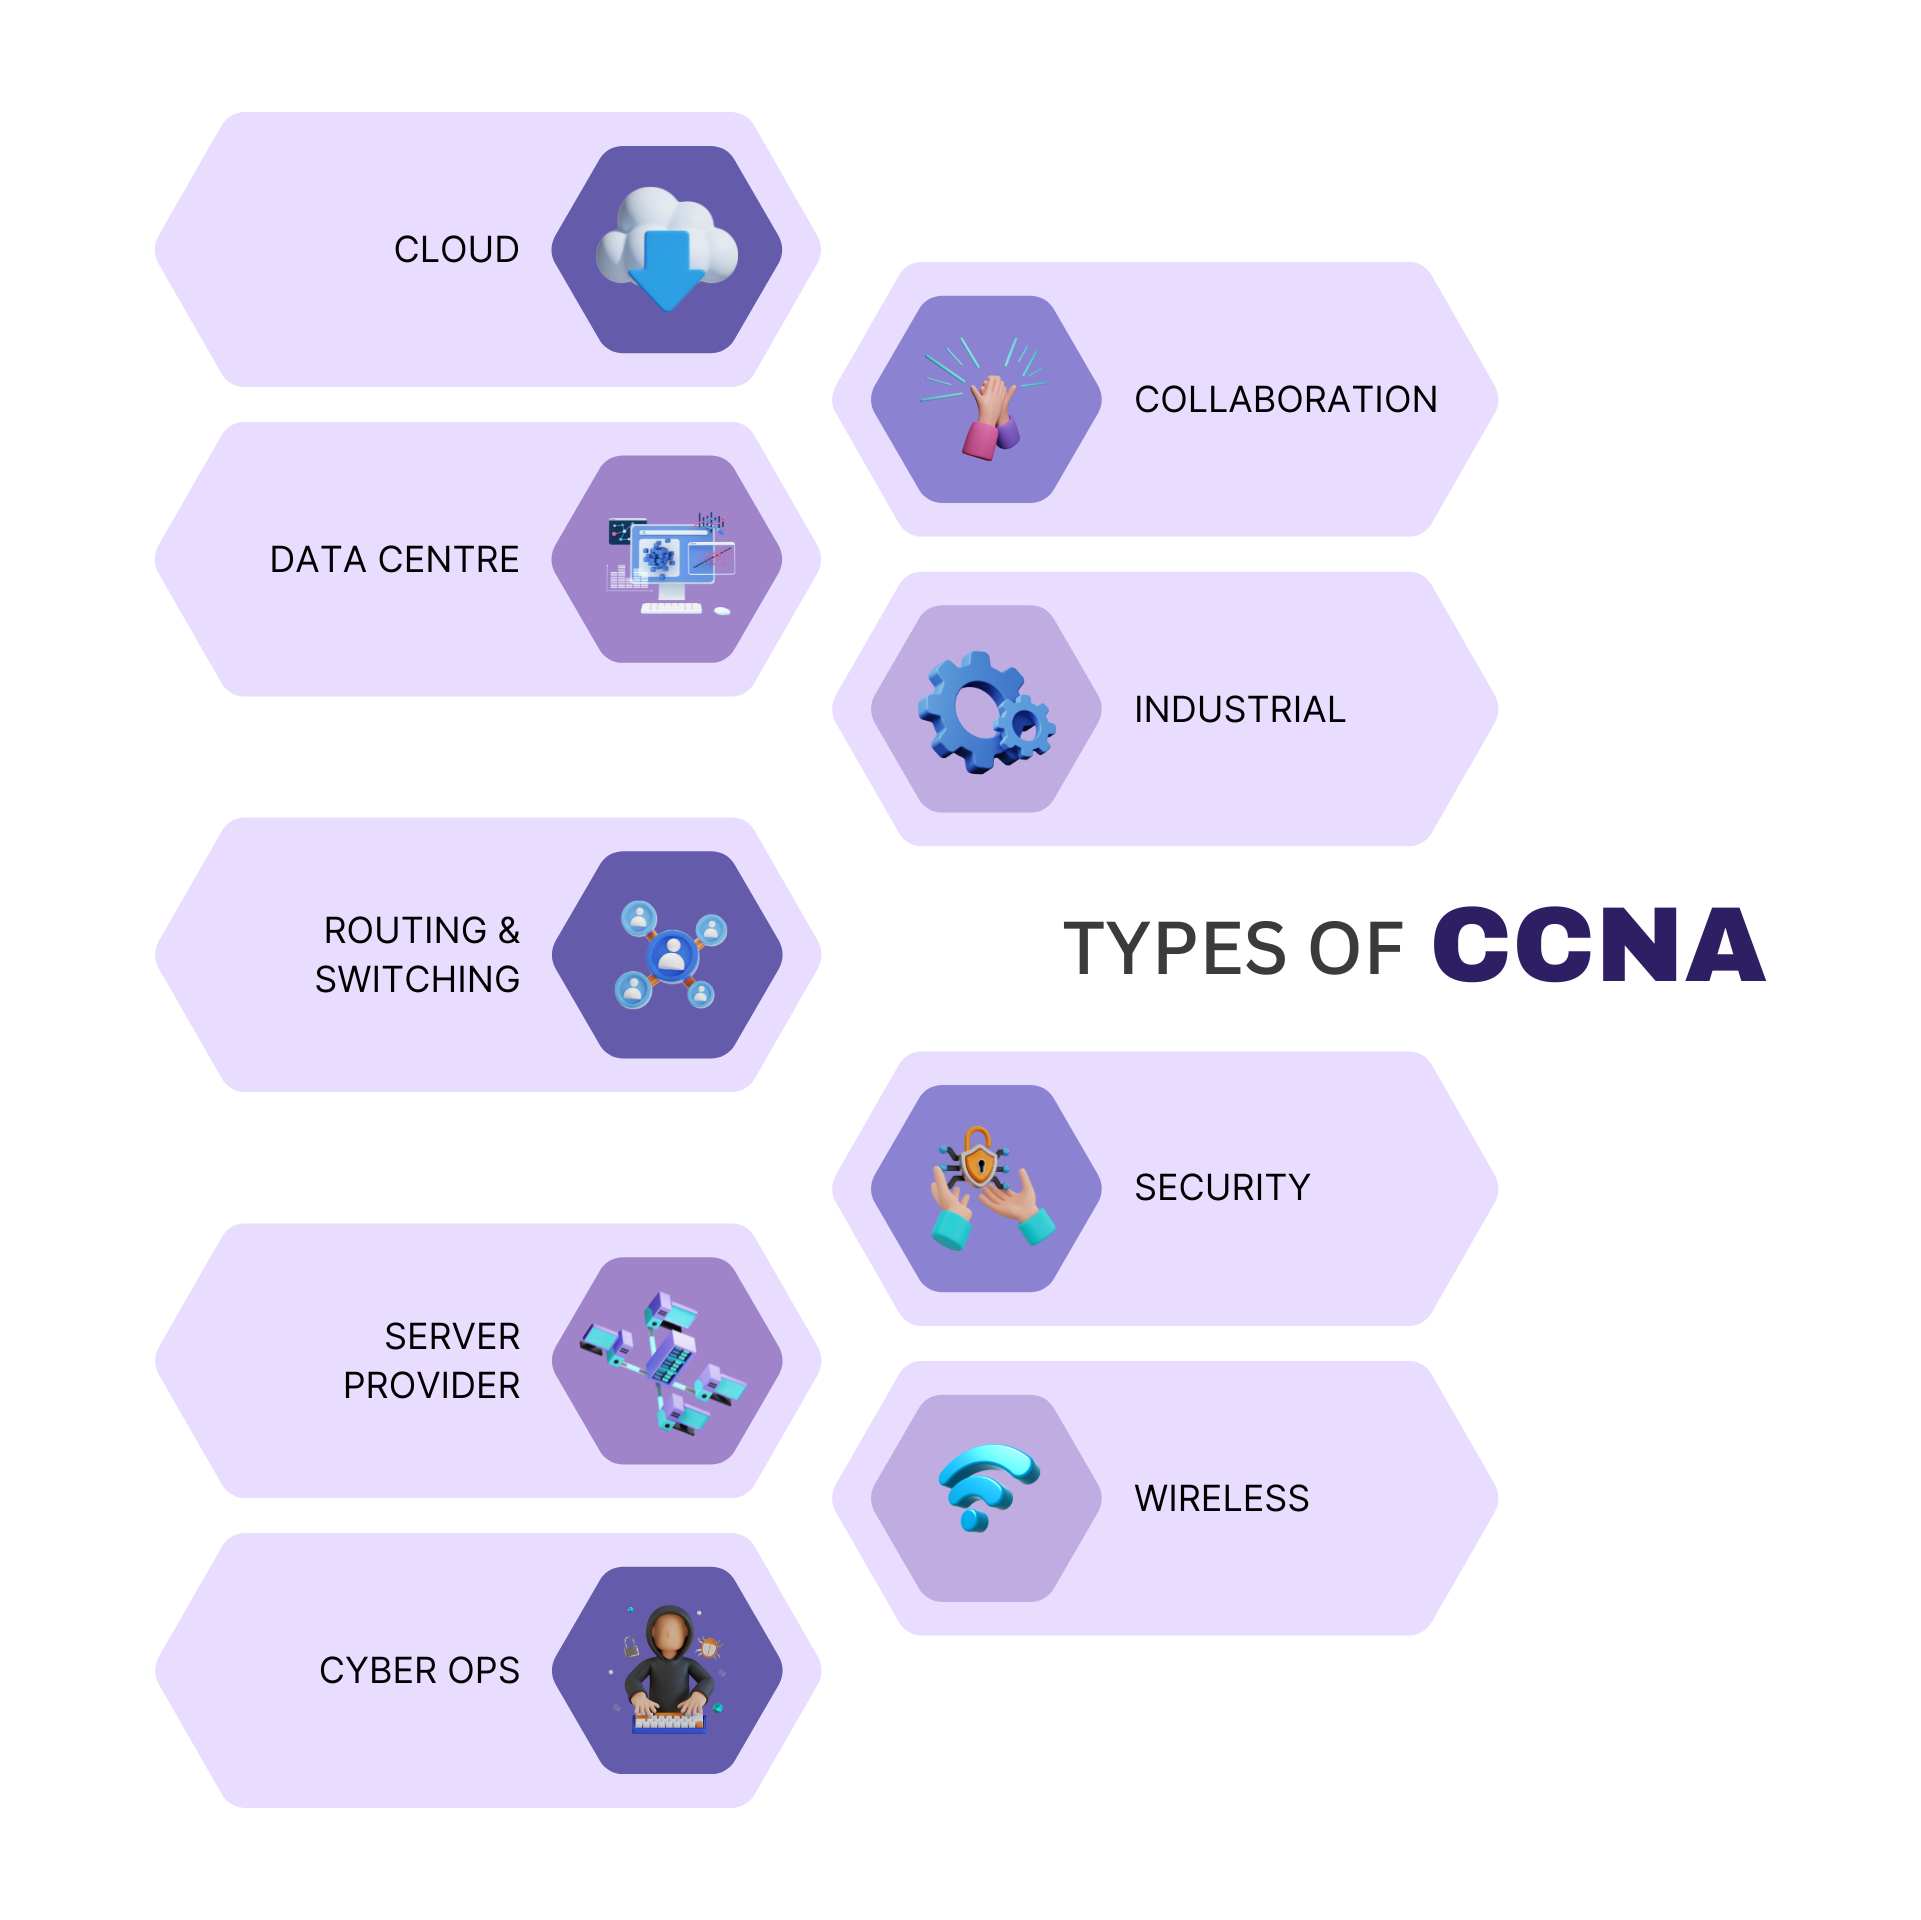 TYPES OF CCNA